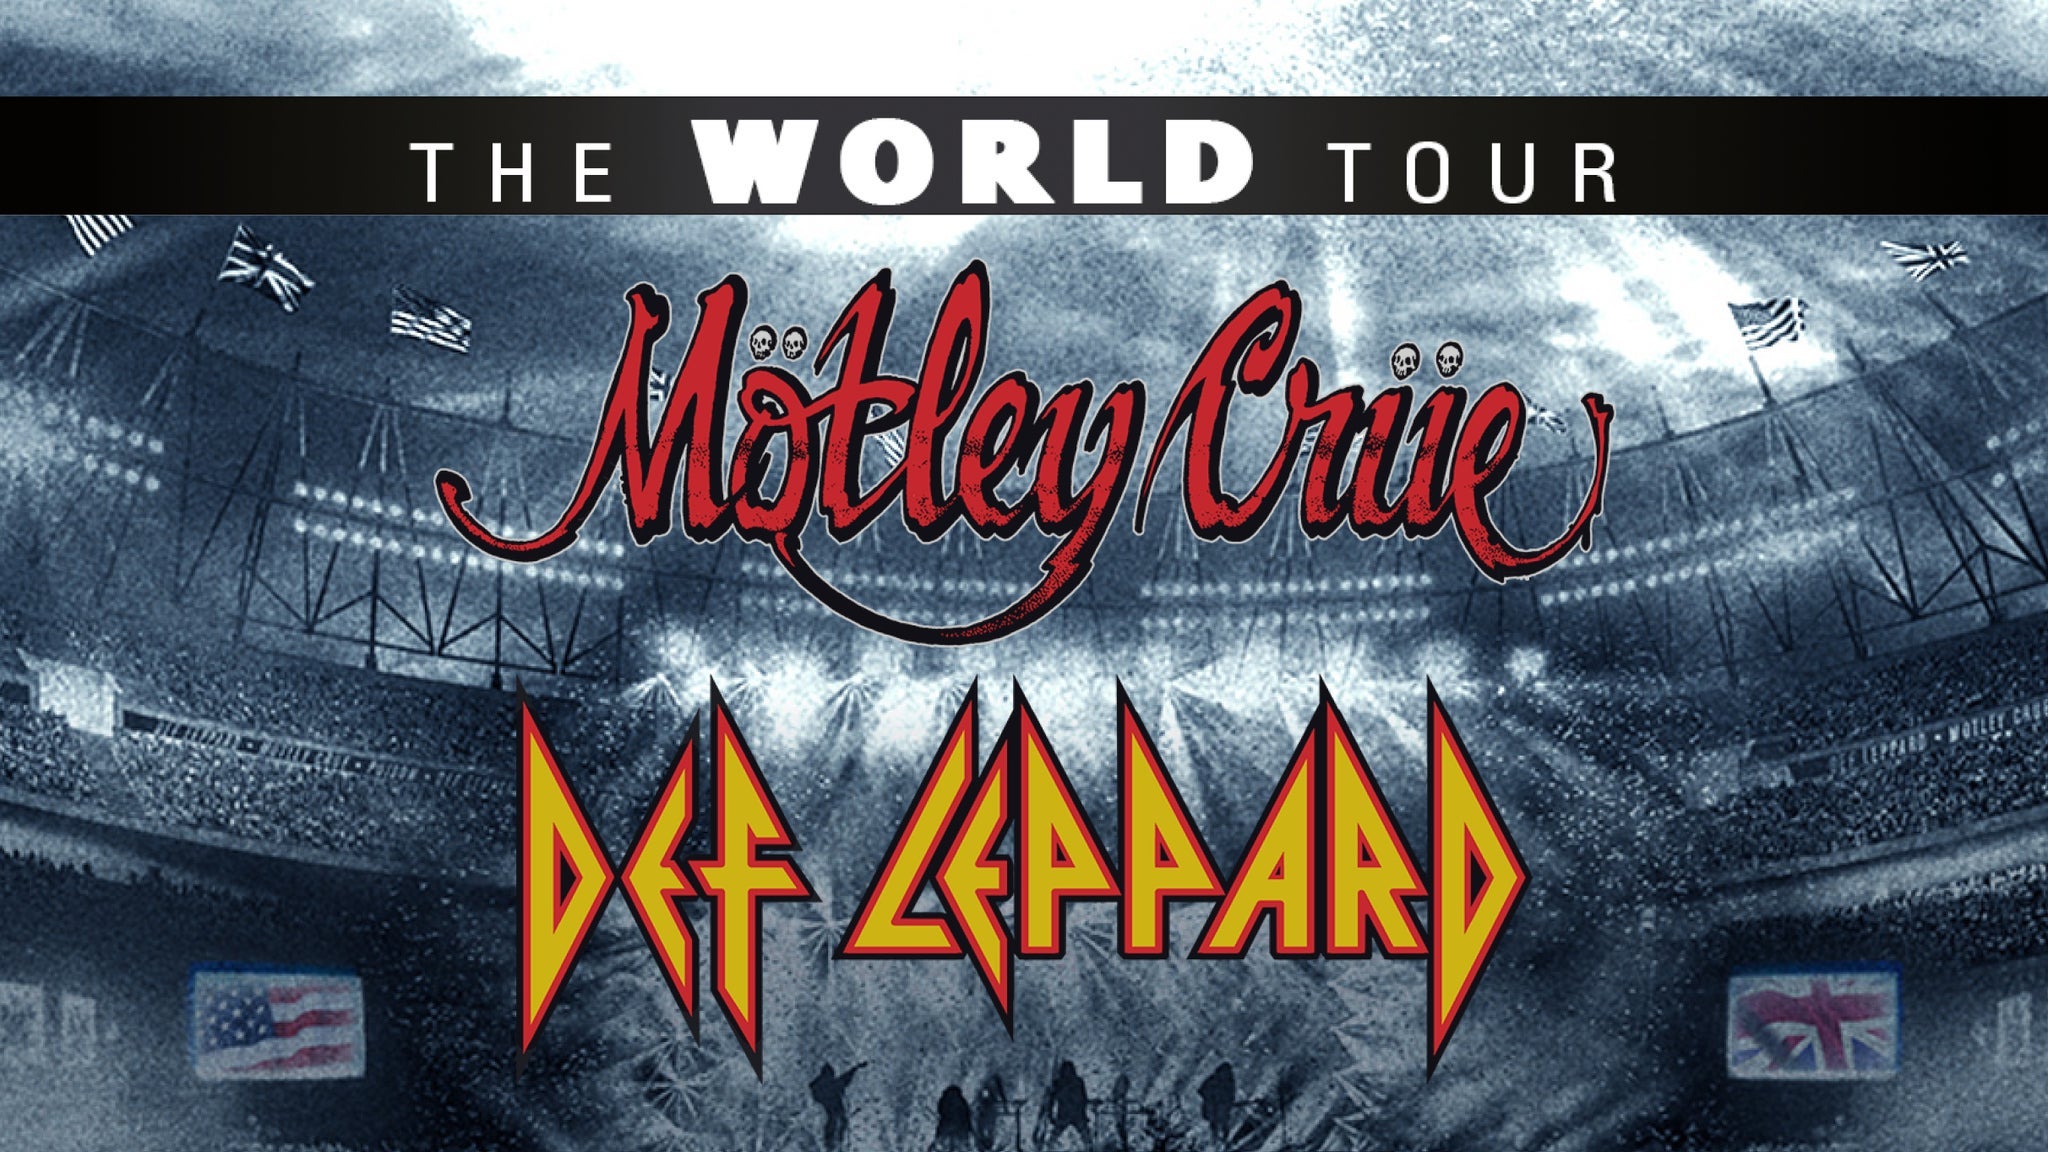 Image used with permission from Ticketmaster | Mötley Crüe & Def Leppard: The World Tour tickets